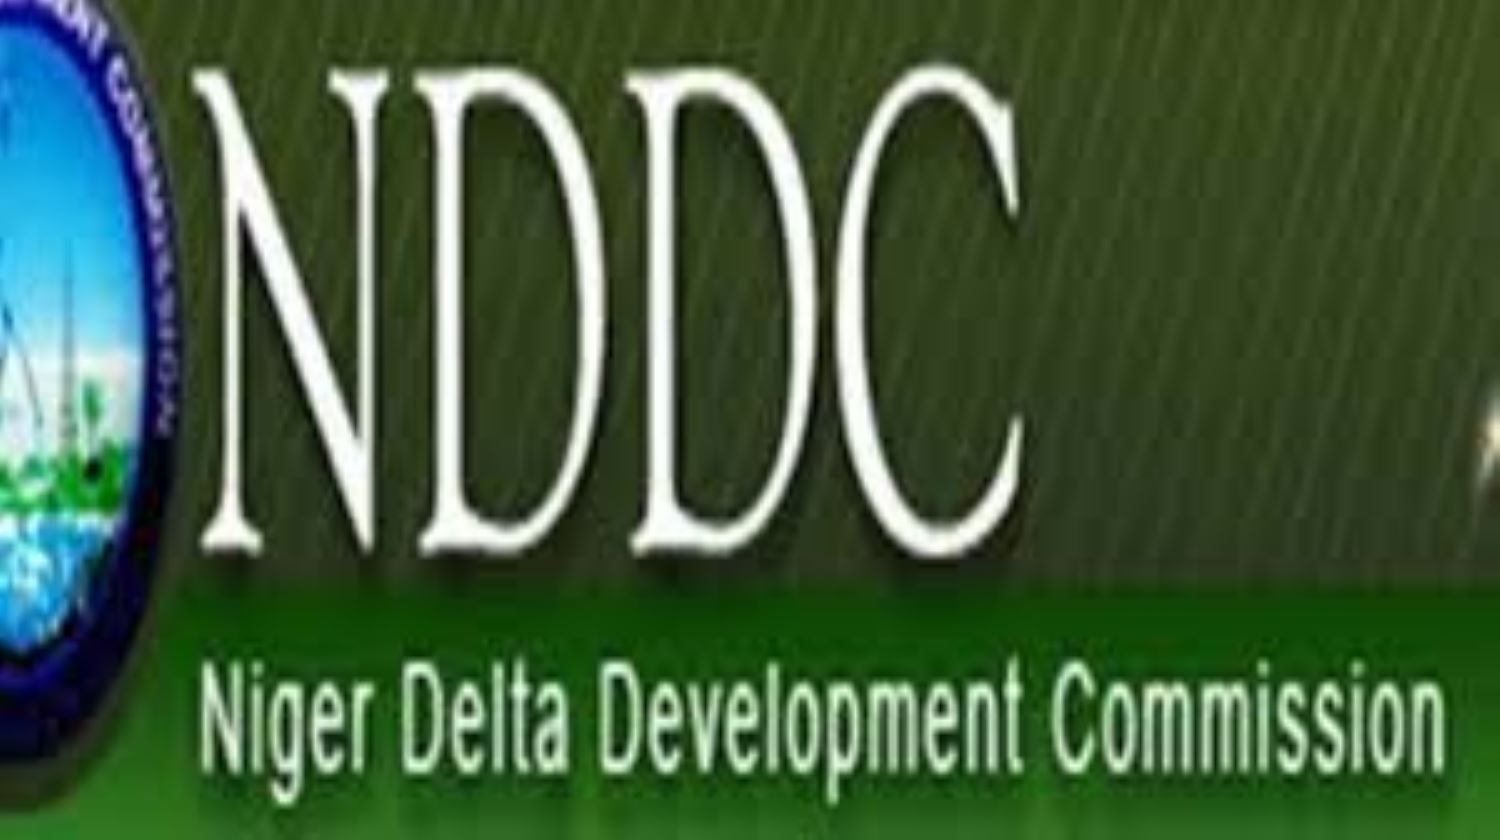 NDDC and new beginning: Quest for excellence - Vanguard News